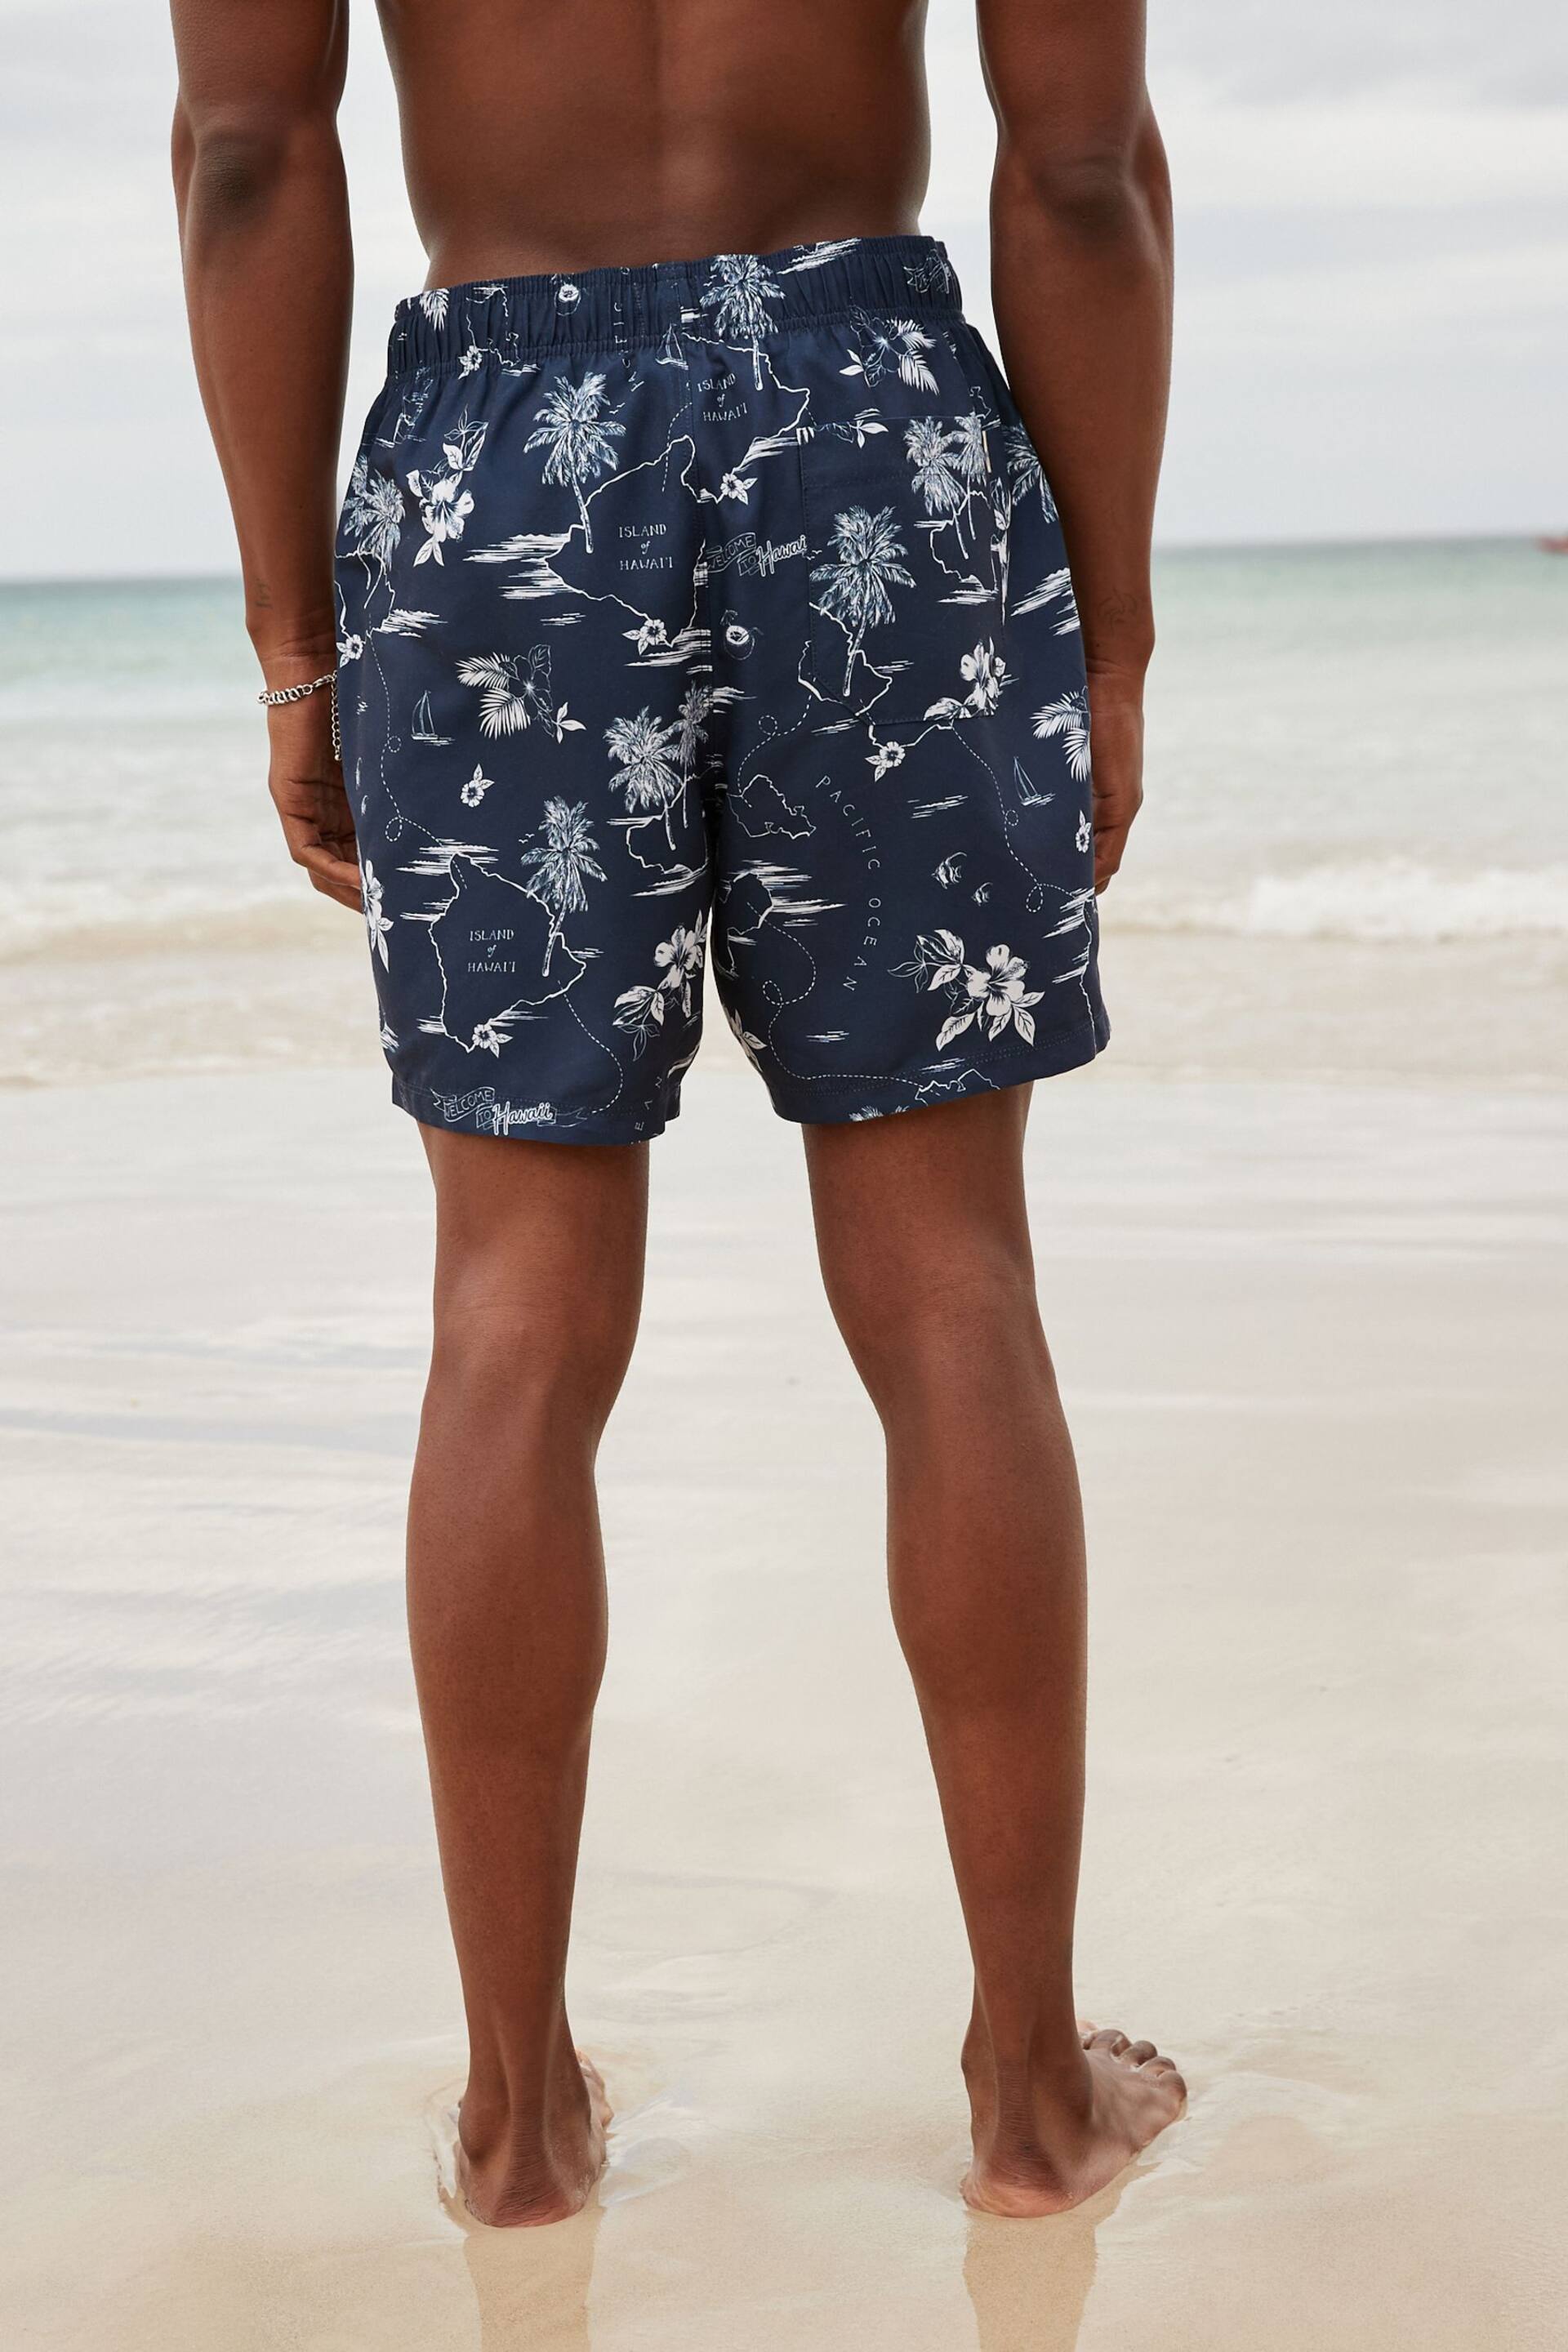 Navy Blue Hawaiian Relaxed Fit Printed Swim Shorts - Image 5 of 11